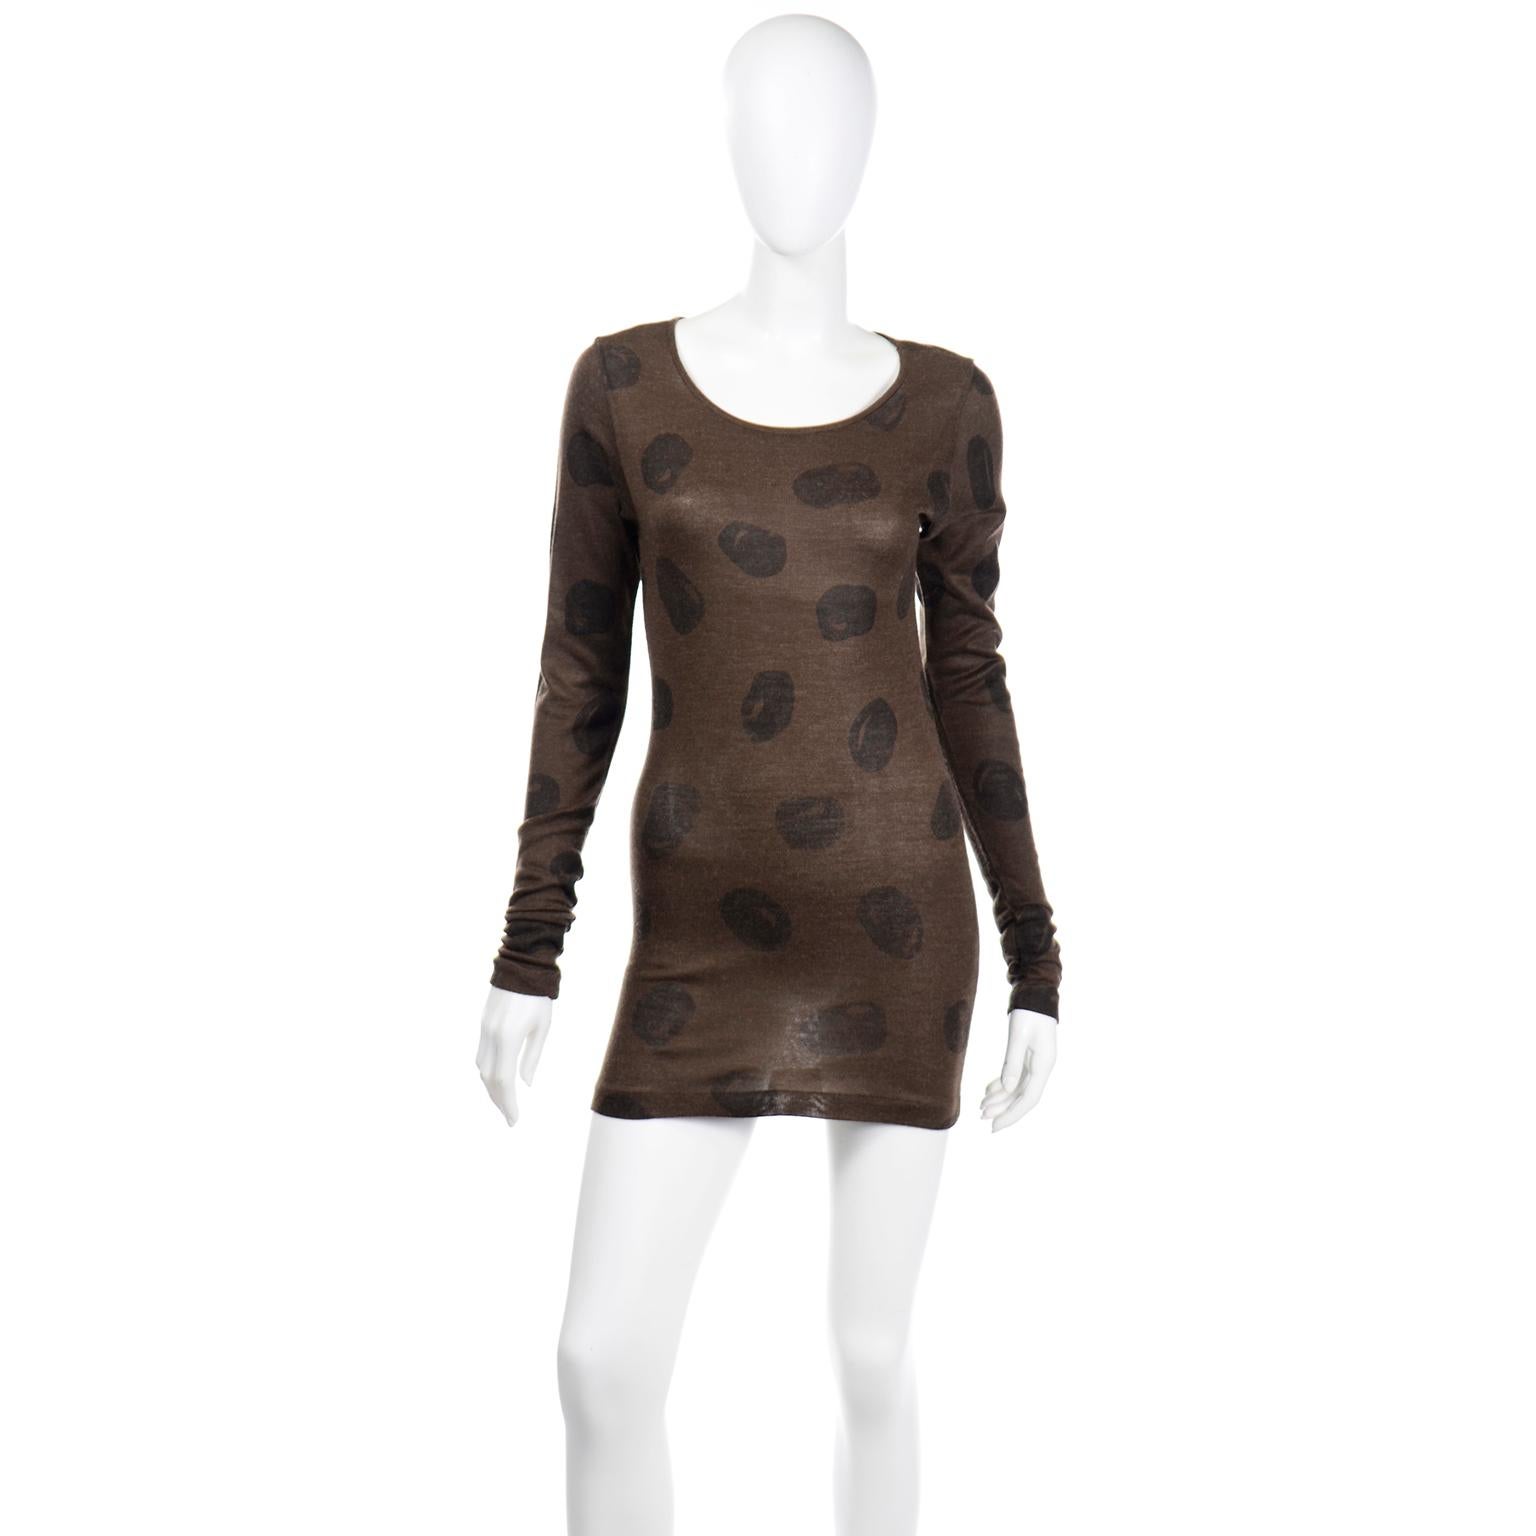 This really fun, 1980's vintage Issey Miyake piece can be worn as a bodycon mini dress or as a longer top!  The fabric is 90% acrylic and 10% wool and the mushroom brown background is printed with abstract dark brown dots or circles. Labeled a size